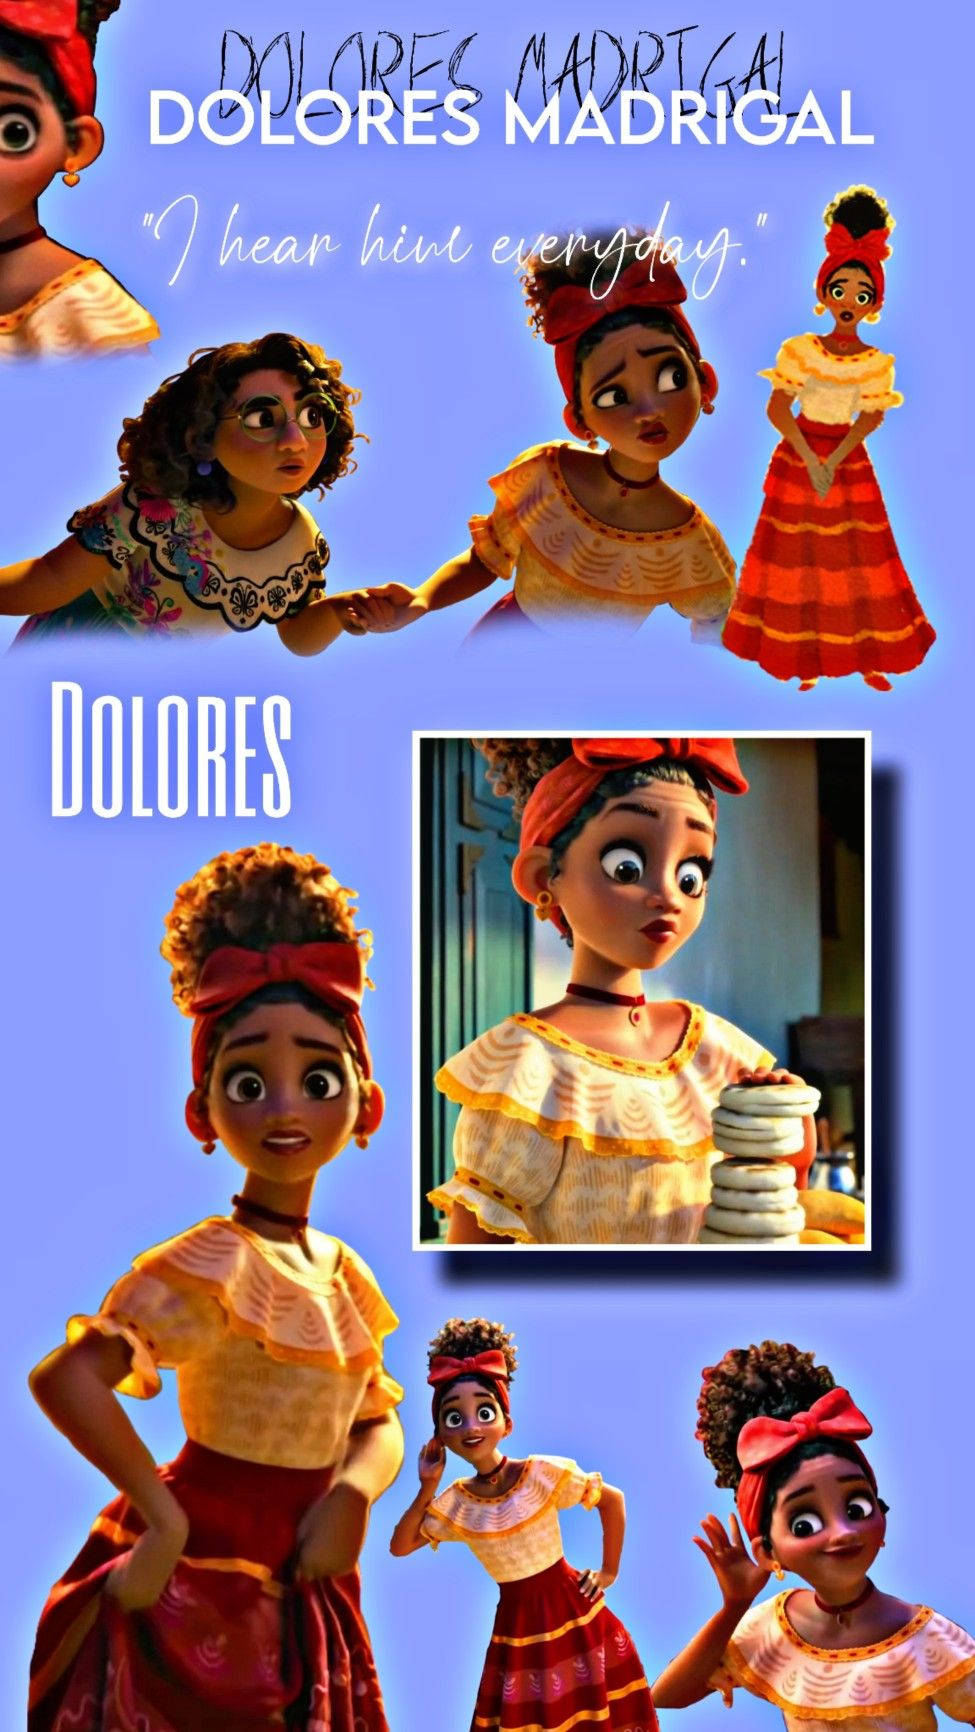 Dolores Madrigal Photo Collage Background